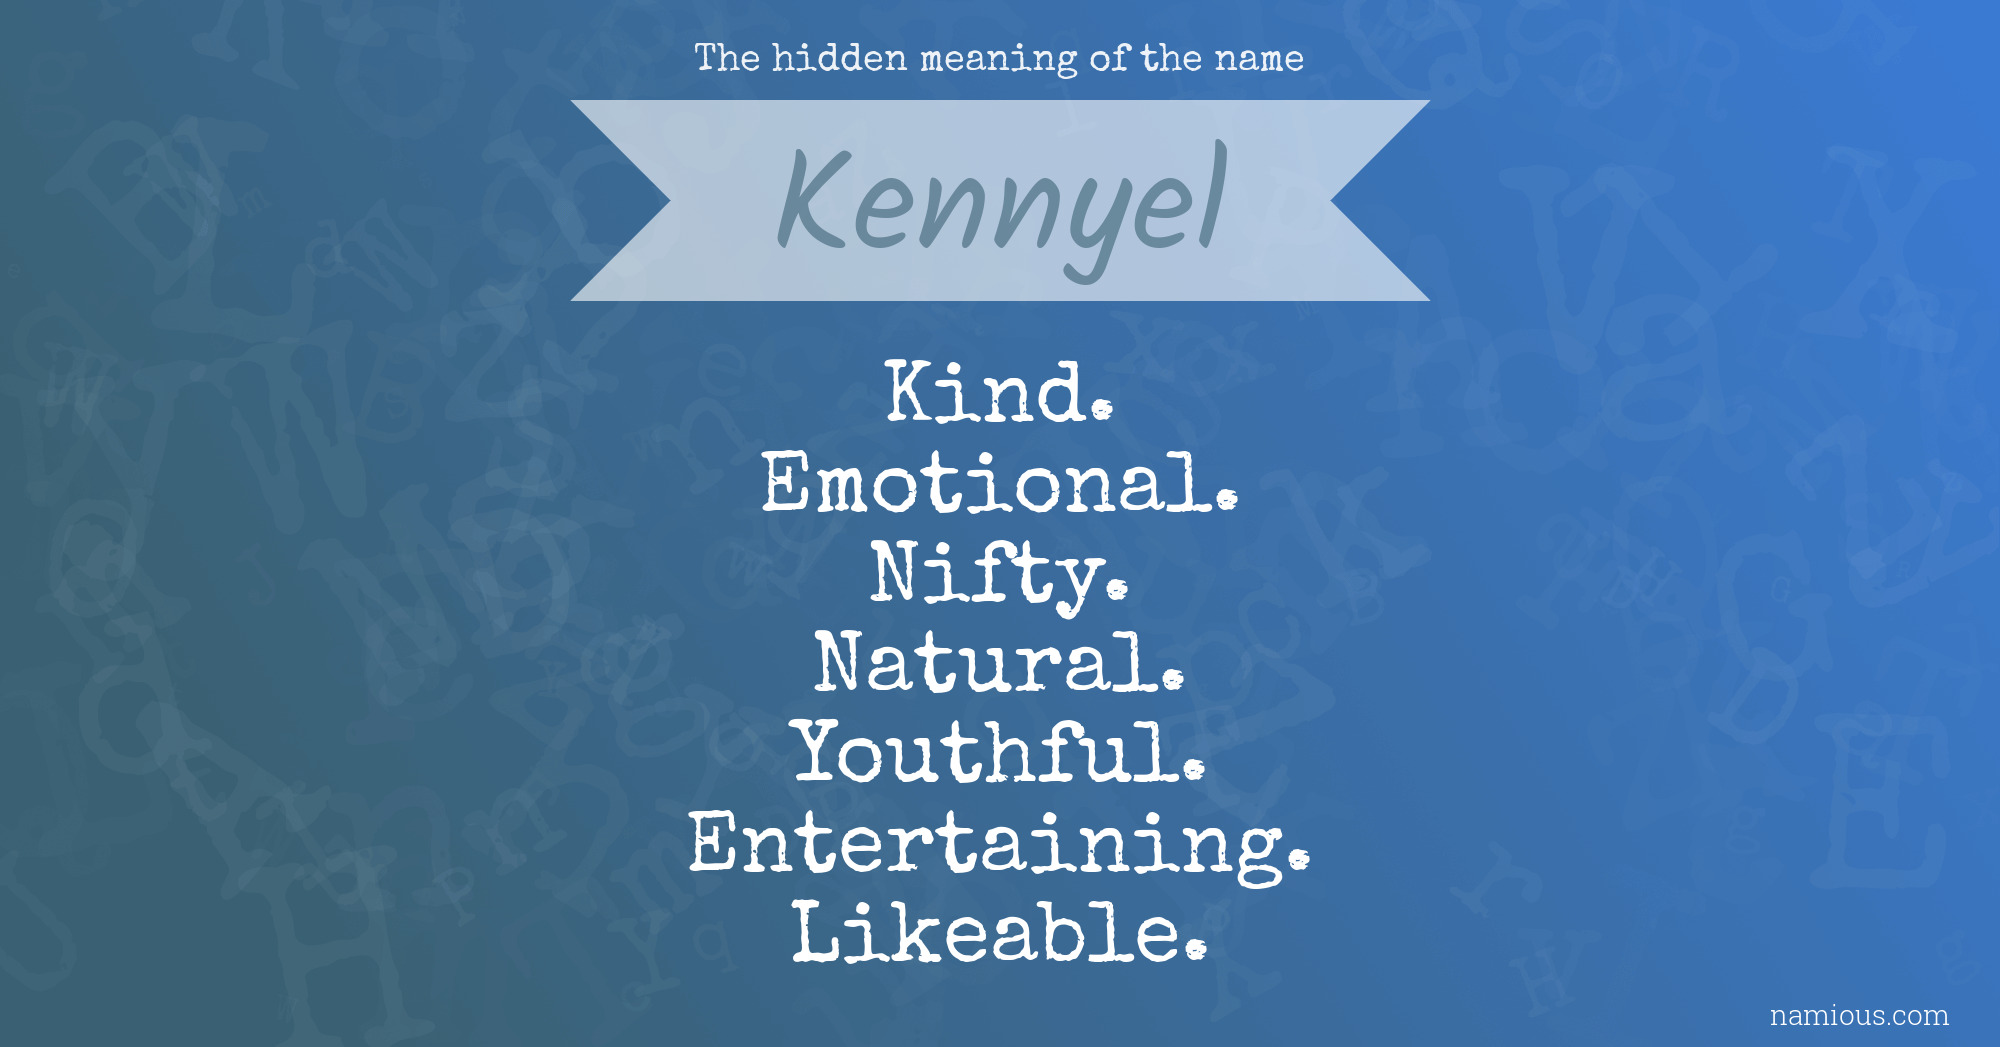 The hidden meaning of the name Kennyel